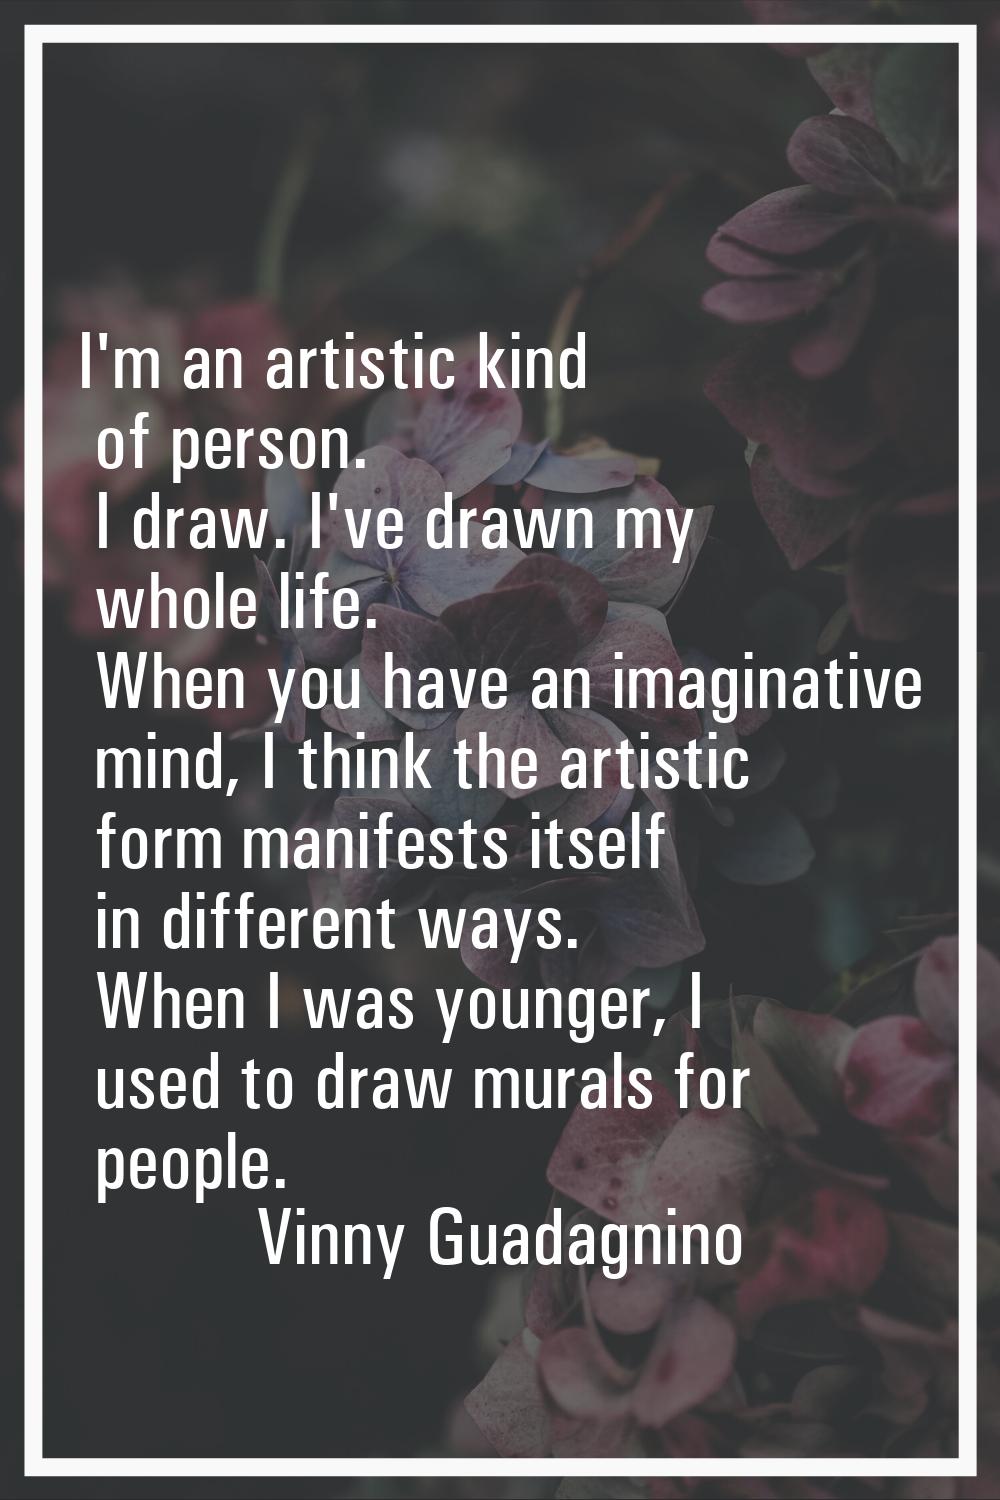 I'm an artistic kind of person. I draw. I've drawn my whole life. When you have an imaginative mind